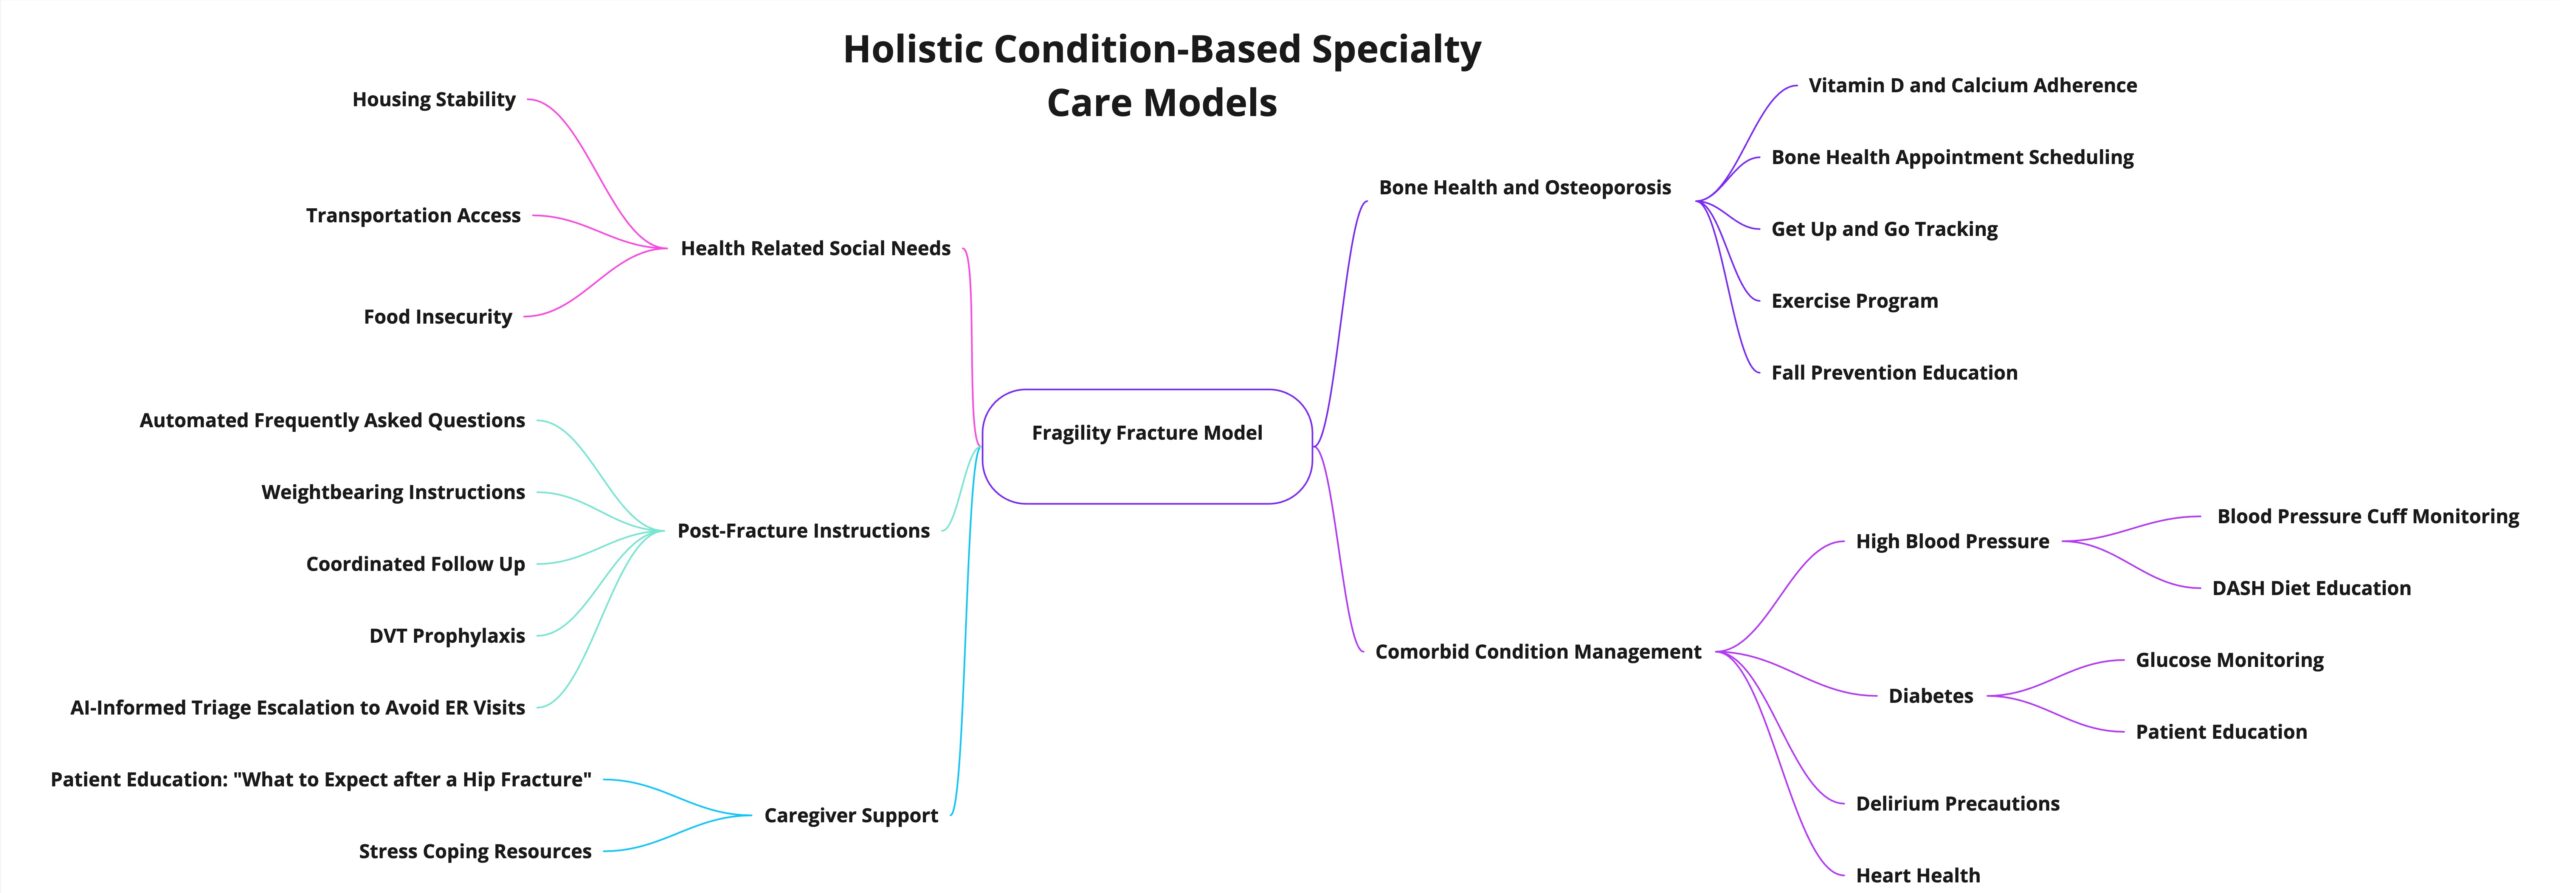 Holistic condition based